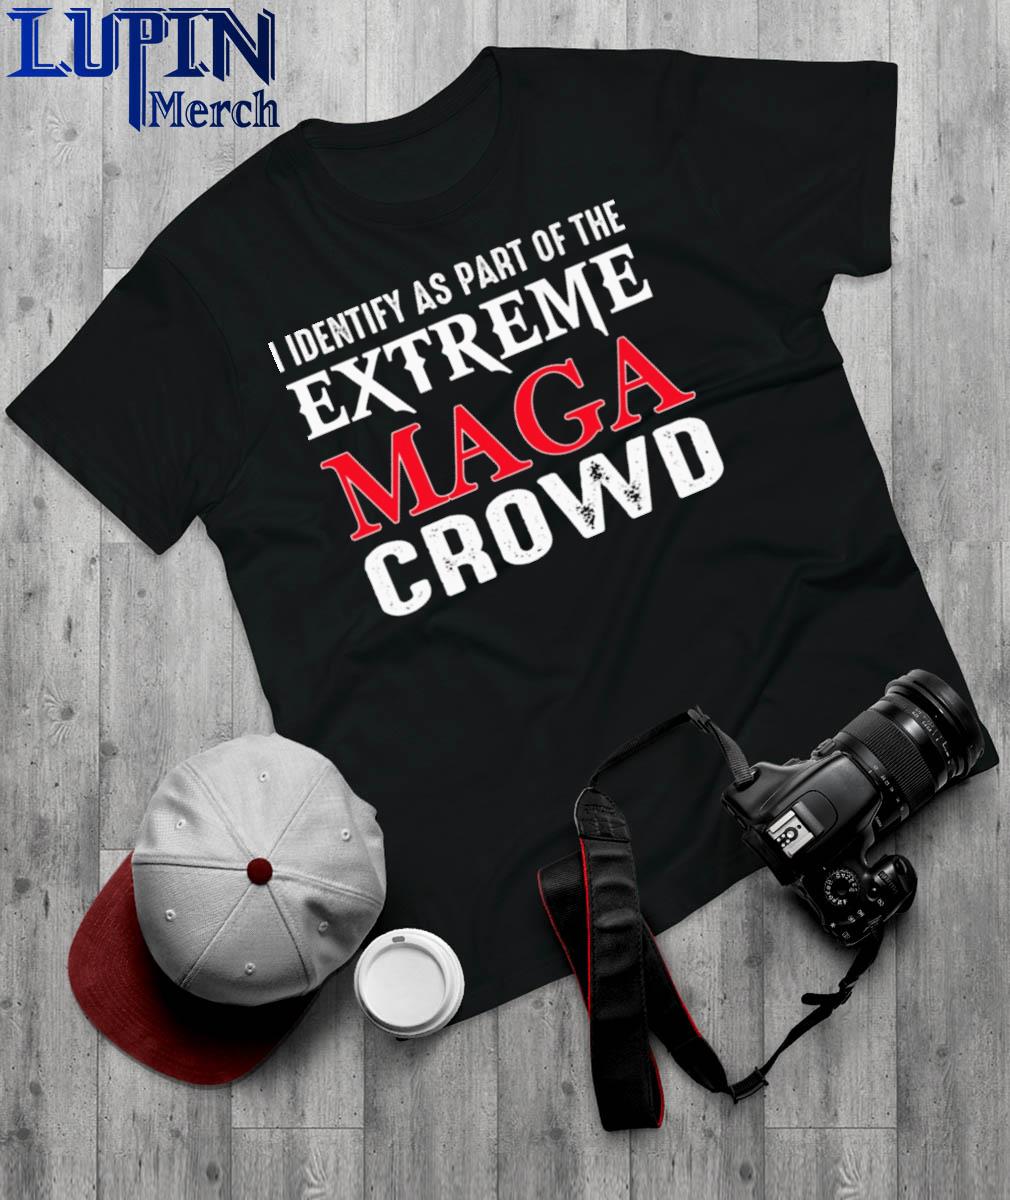 Official I Identify as part of the Extreme Maga Crowd shirt